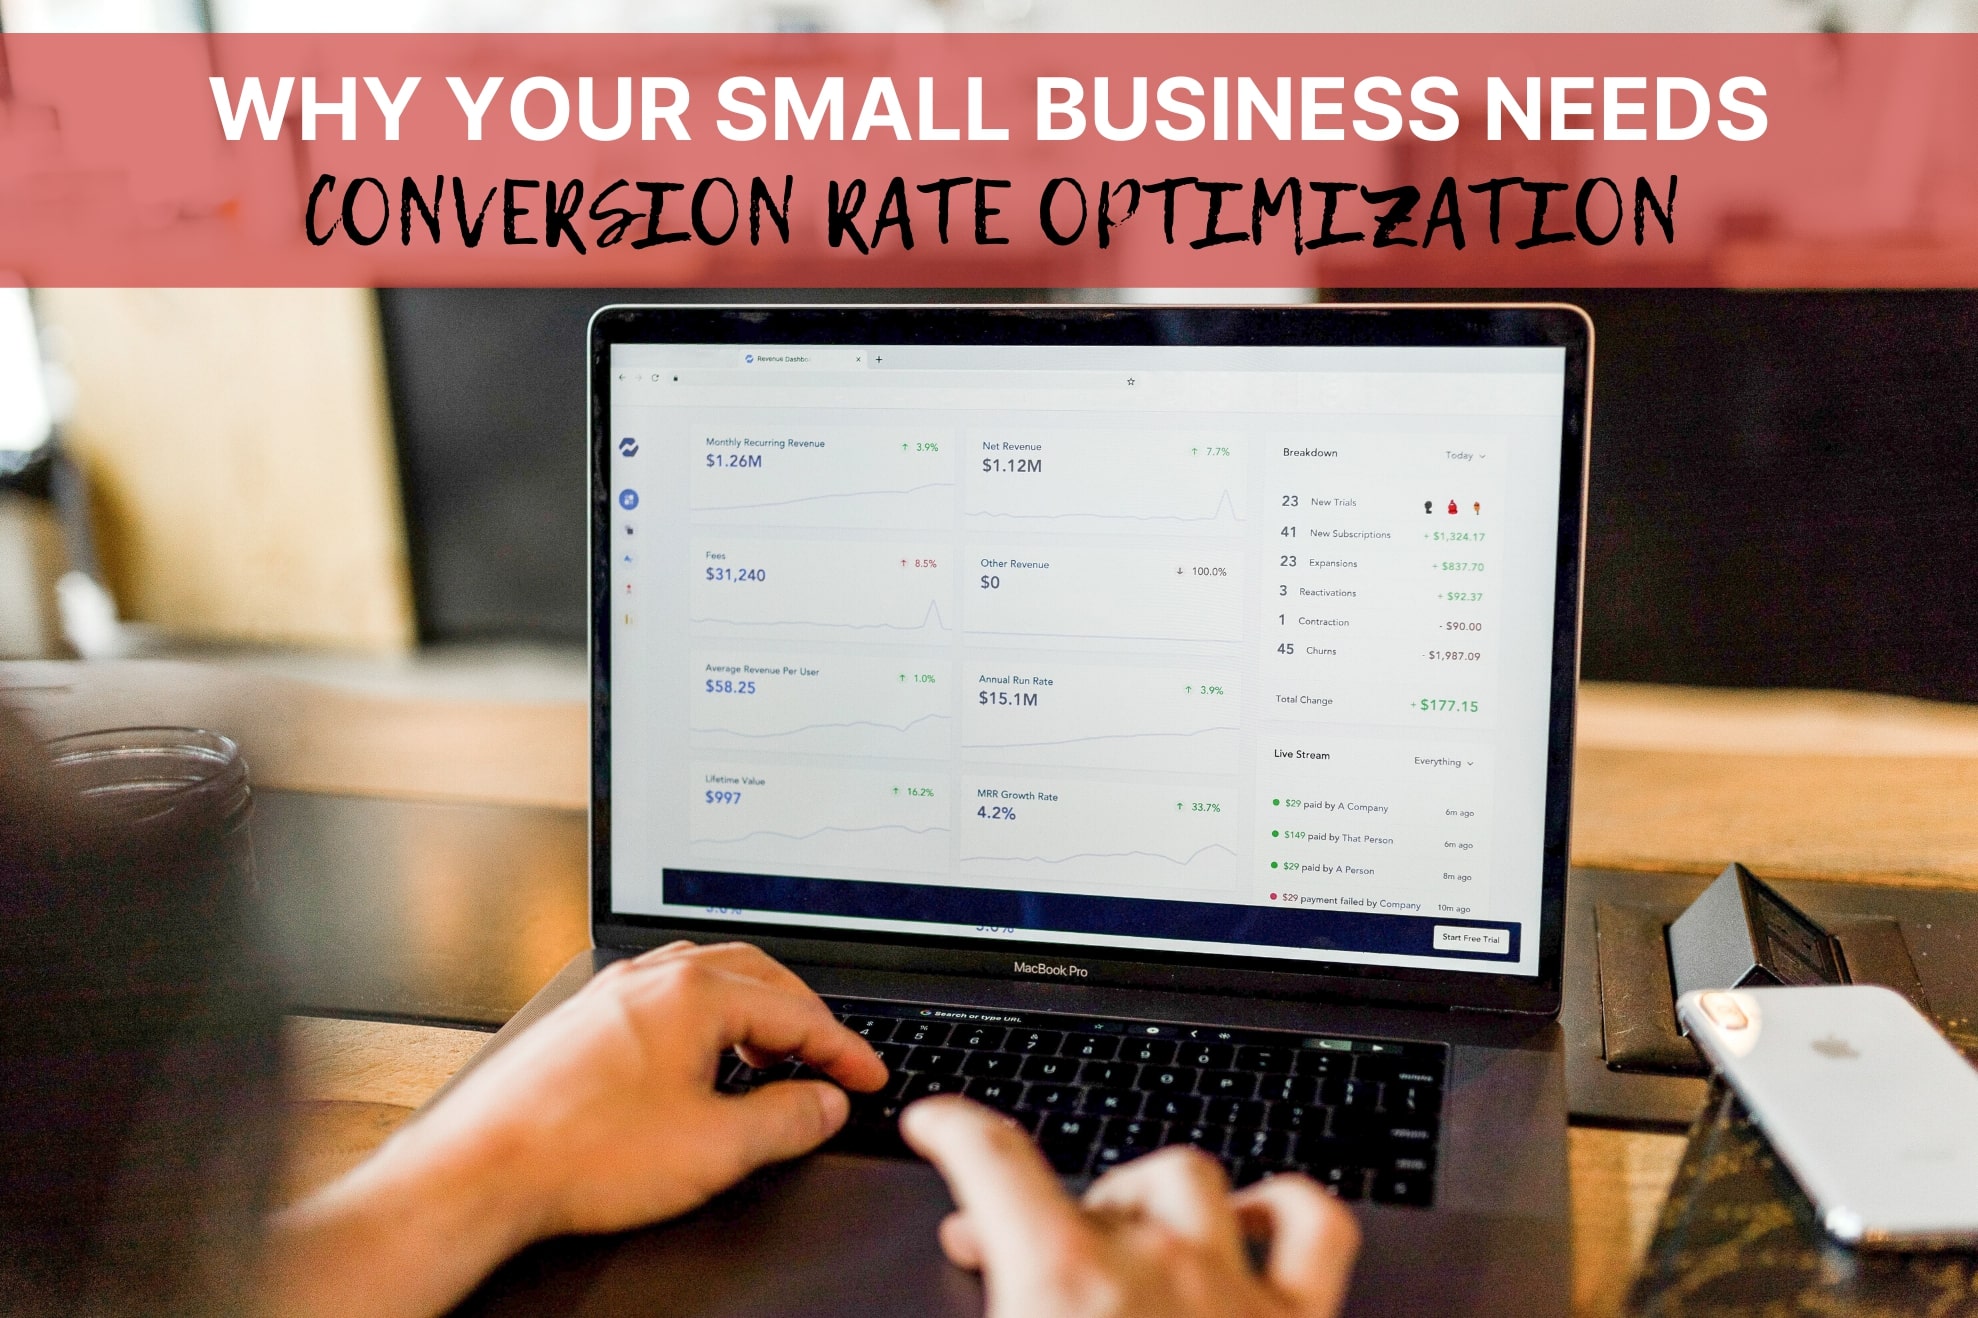 Why Does Your Small Business Need CRO?